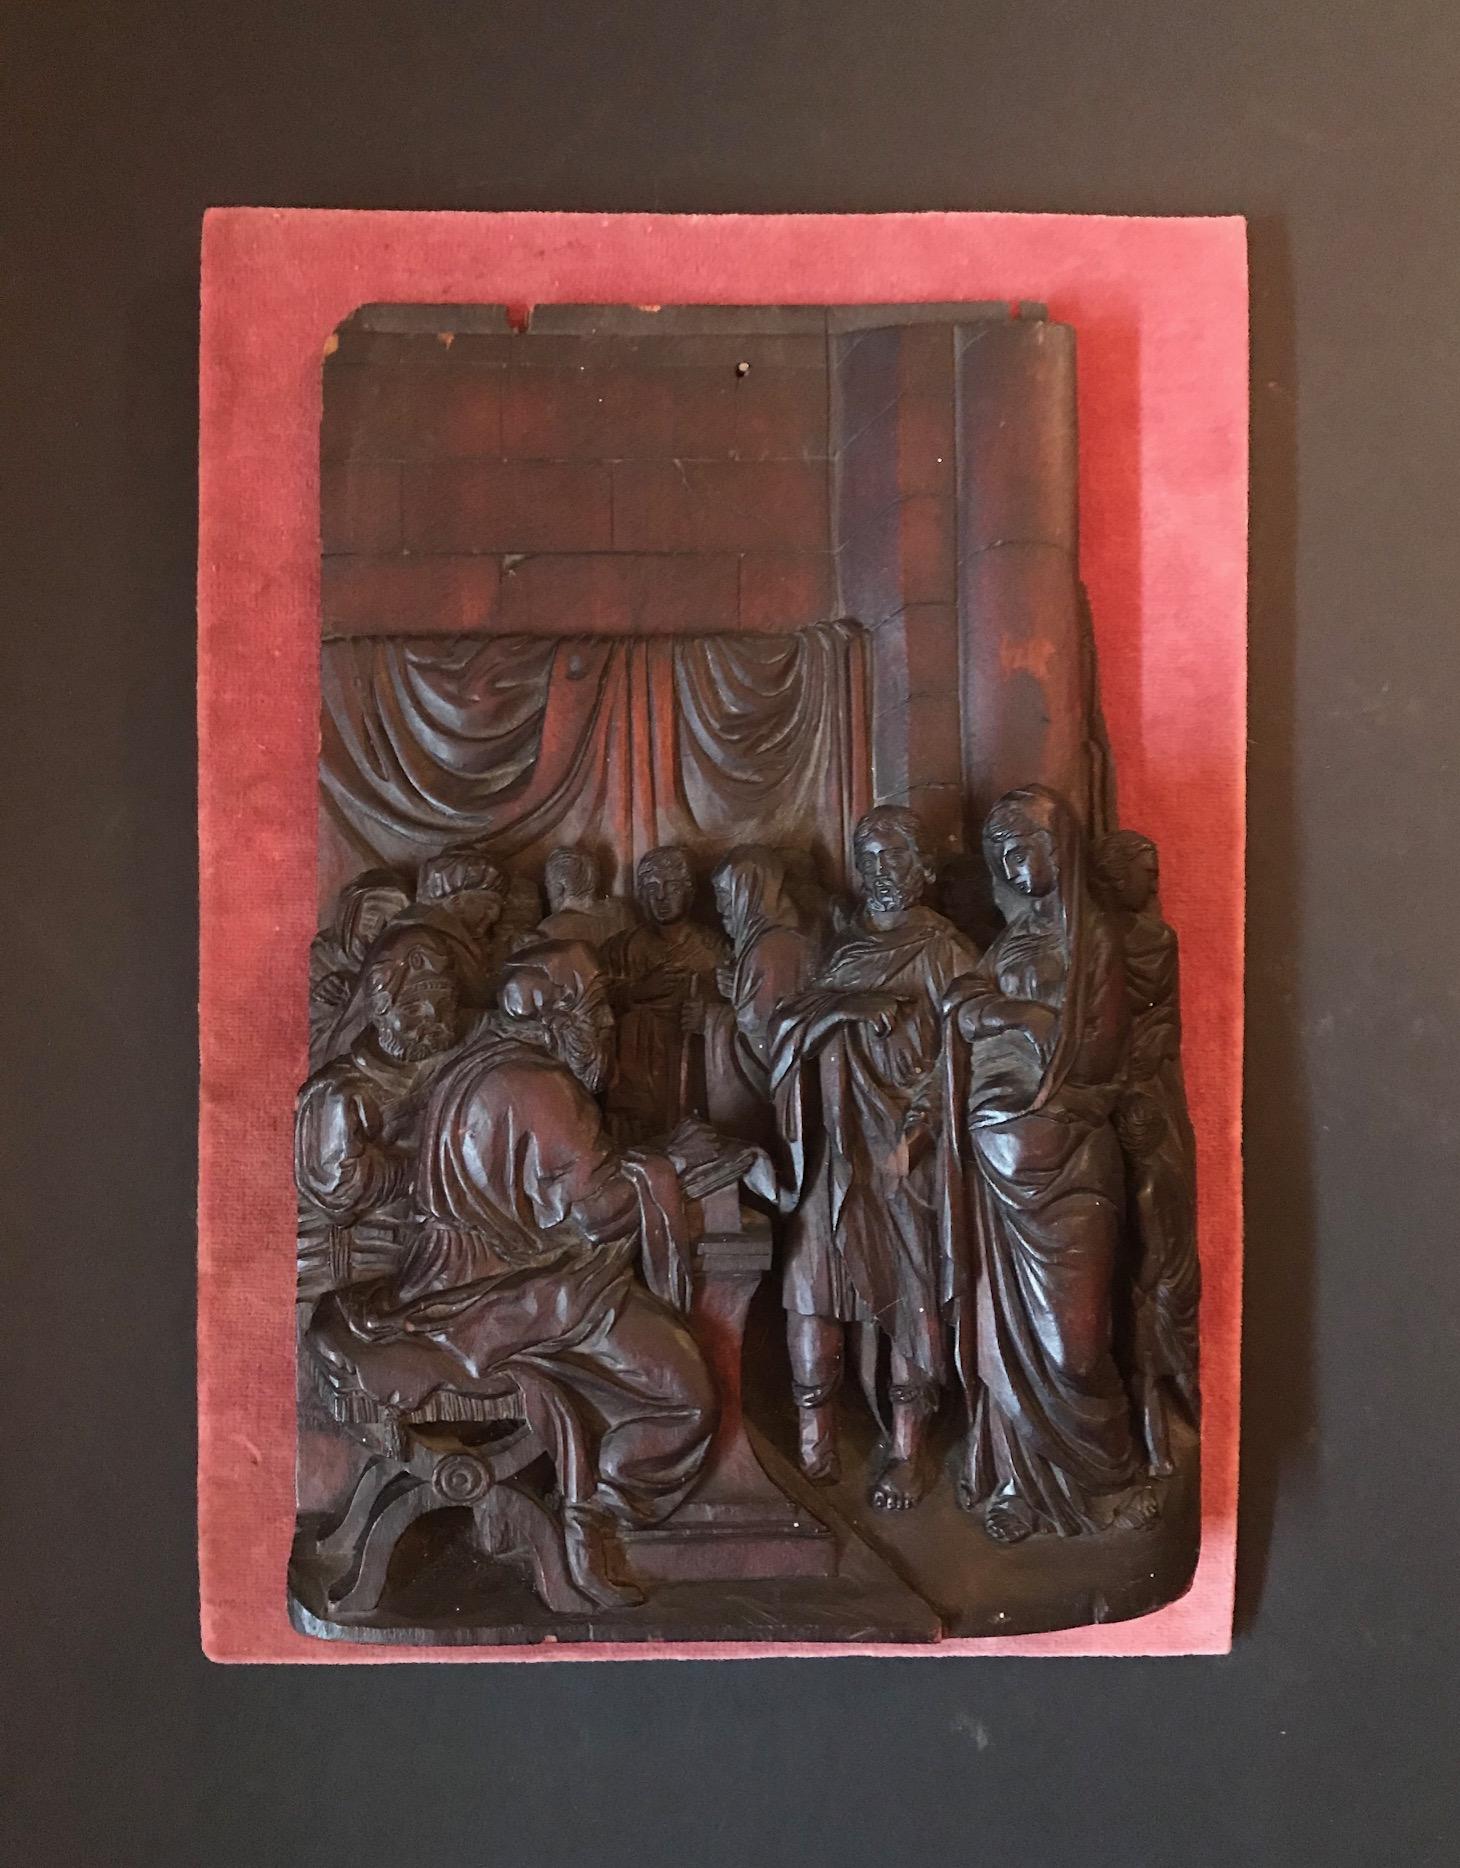 This rare 17th century panel, carved in high relief, is museum quality and without doubt the work of an important Flemish master carver. It represents the biblical scene of Mary and Joseph in Bethlehem for the census. Multiple figures surround the